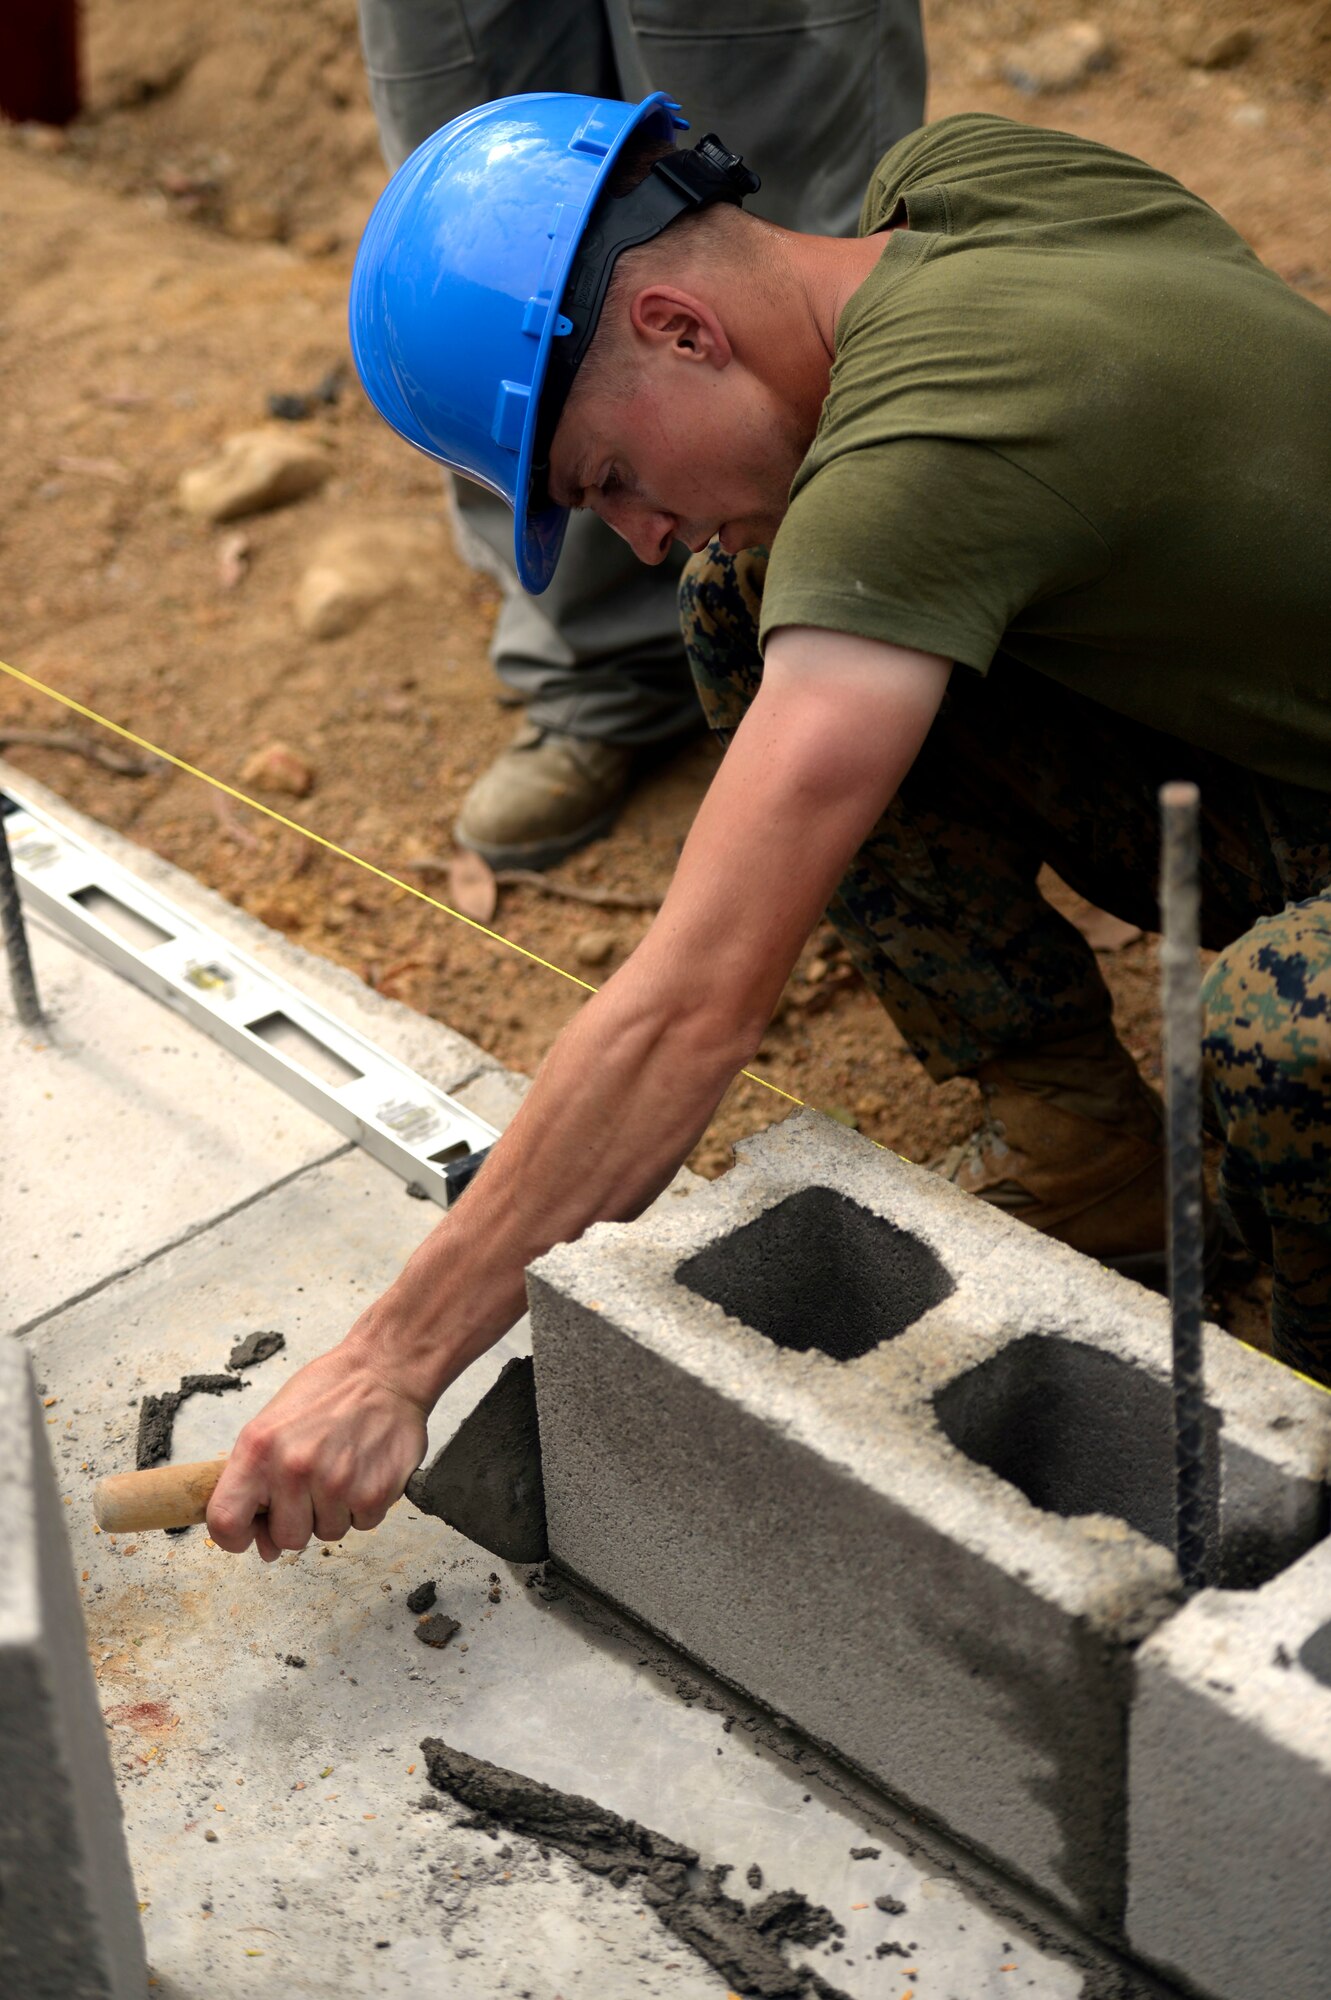 U.S. Marine Sgt. Caleb Rey, a combat engineer and Spring Hope, N.C., native with the 271st Marine Wing Support Squadron, 2nd Marine Air Wing, out of Marine Corps Air Station Cherry Point, N.C., cleans mortar from around a block in the first course of bricks being laid for the Gabriela Mistral primary school in Ocotoes Alto, June 1, 2015. The construction project is part of the New Horizons Honduras 2015 training exercise, an annual humanitarian exercise put on by U.S. Southern Command. New Horizons was launched in the 1980s and is an annual joint humanitarian assistance exercise that U.S. Southern Command conducts with a partner nation in Central America, South America or the Caribbean. The exercise improves joint training readiness of U.S. and partner nation civil engineers, medical professionals and support personnel through humanitarian assistance activities. (U.S. Air Force photo by Capt. David J. Murphy/Released)